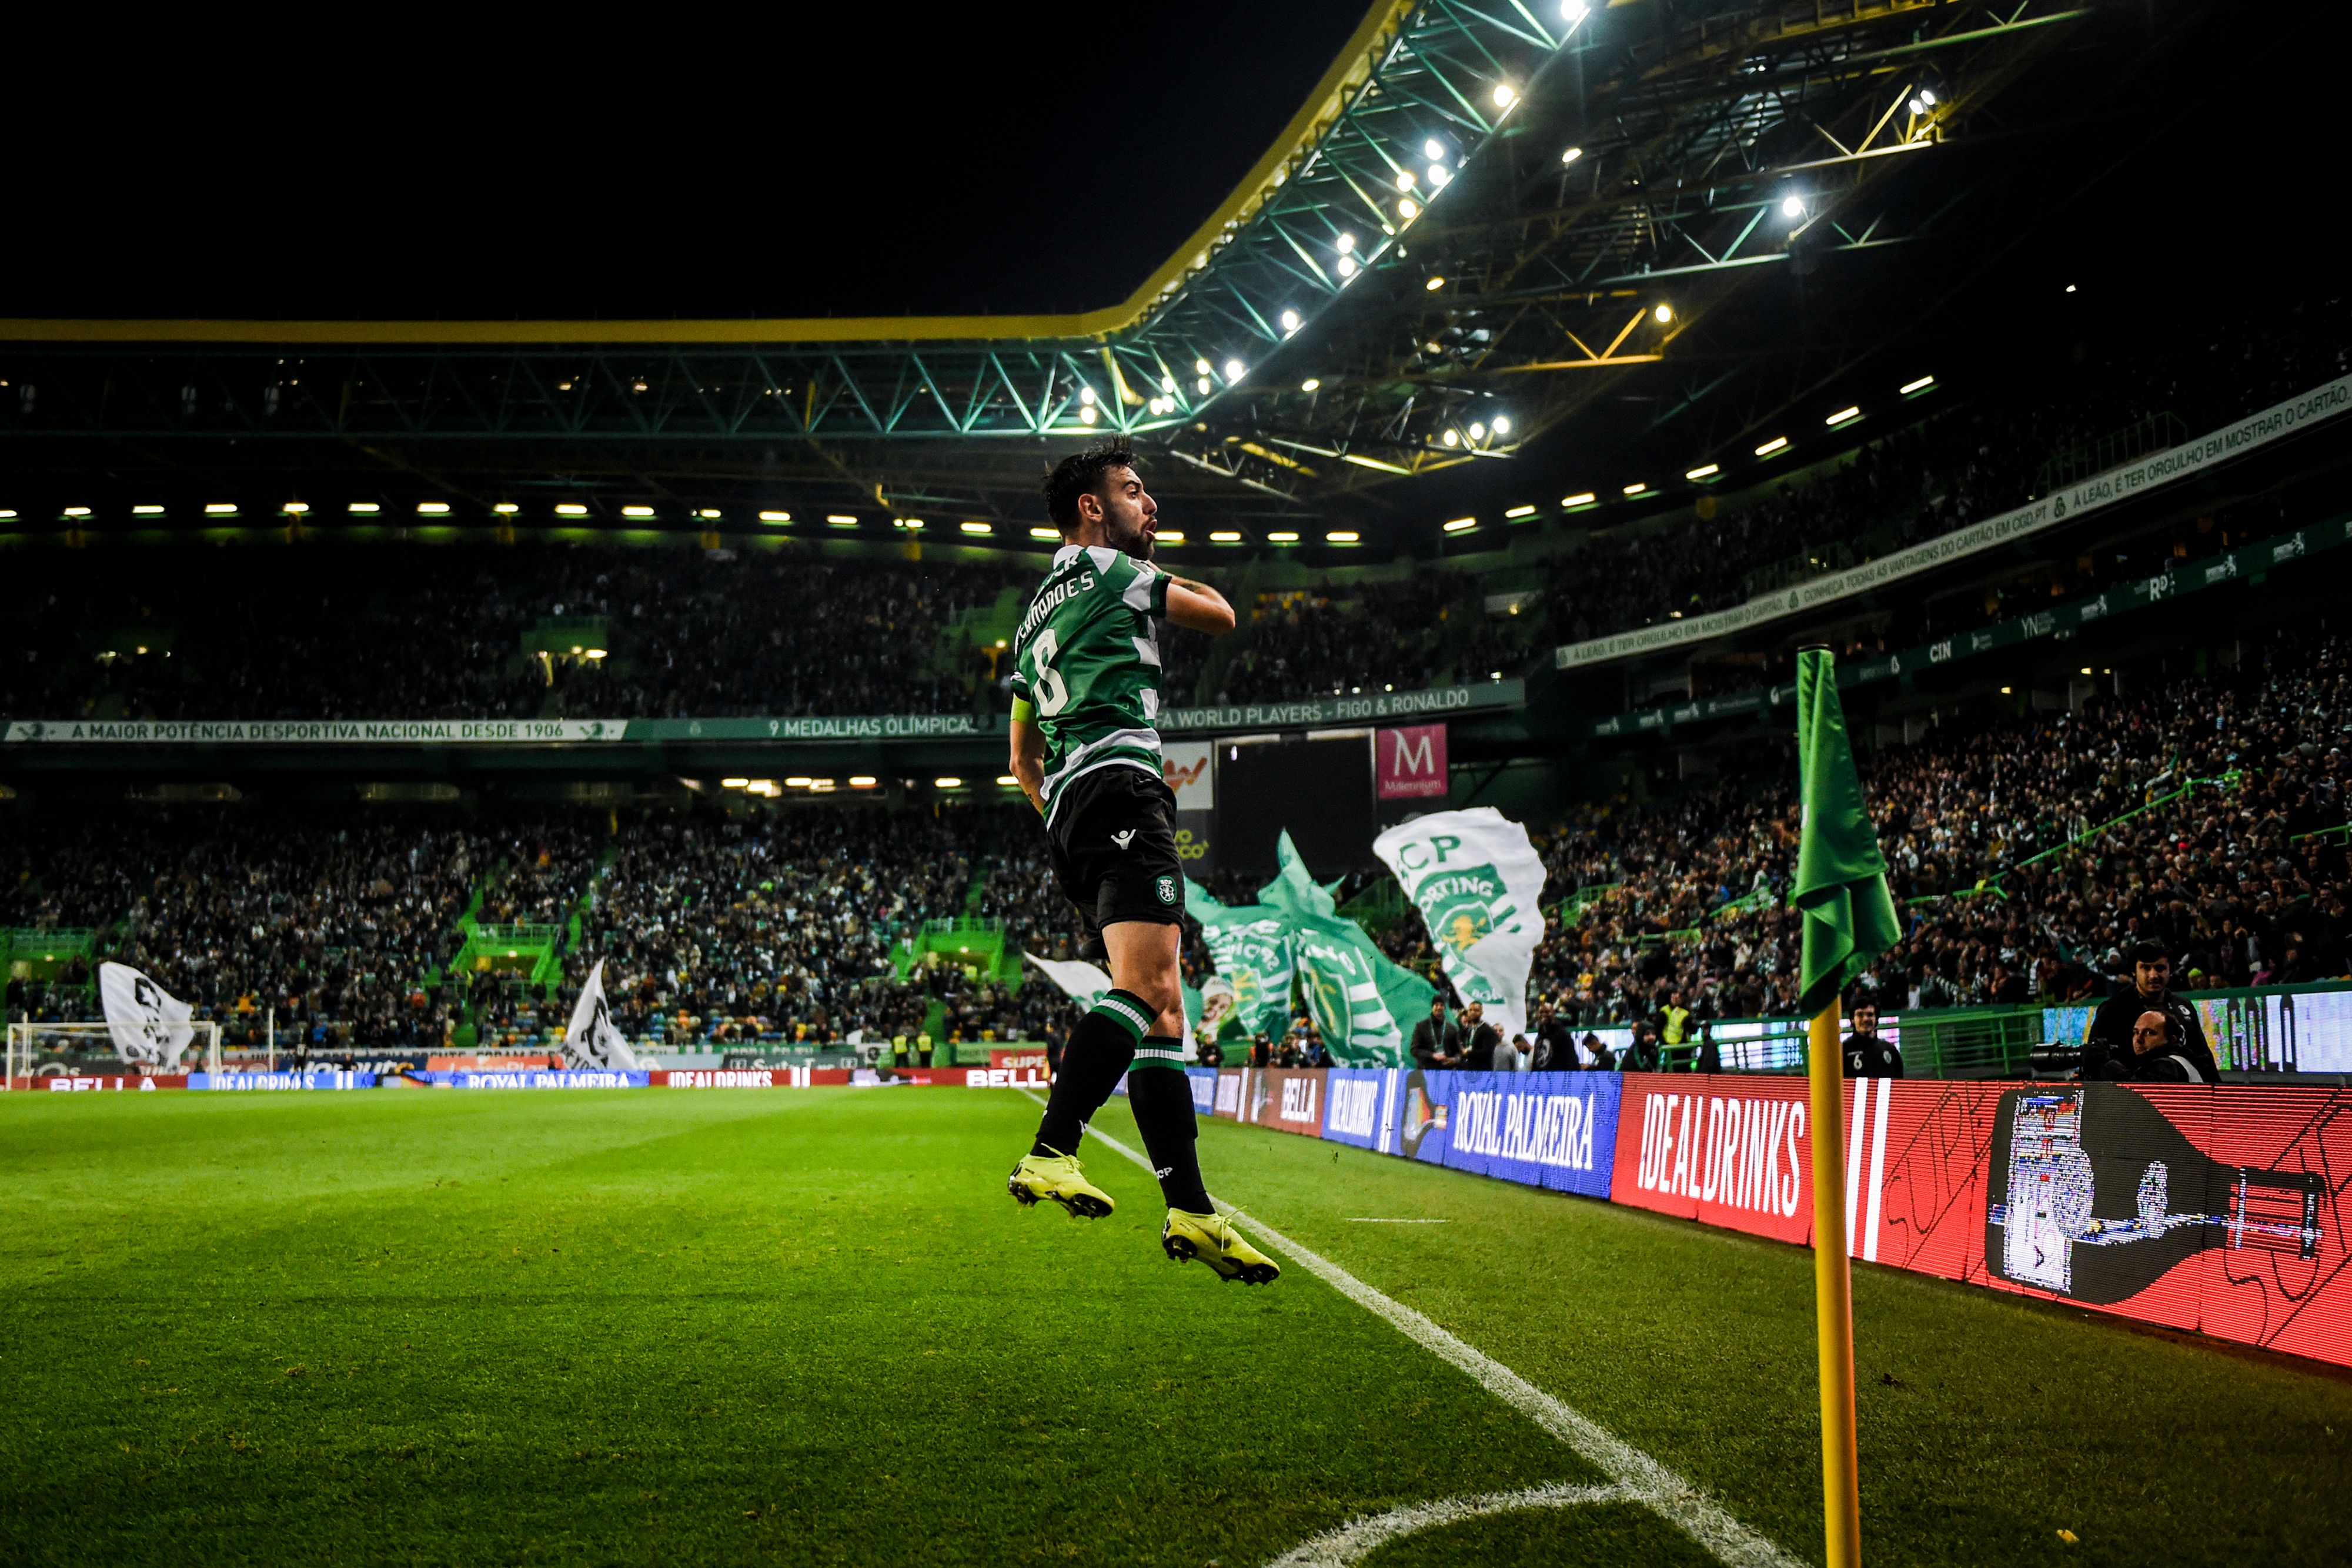 Sporting's midfielder Bruno Fernandes celebrates a goal during the Portuguese League football match between Sporting Lisbon and Nacional at the Jose Alvalade stadium in Lisbon on December 16, 2018. (Photo by PATRICIA DE MELO MOREIRA / AFP)        (Photo credit should read PATRICIA DE MELO MOREIRA/AFP/Getty Images)